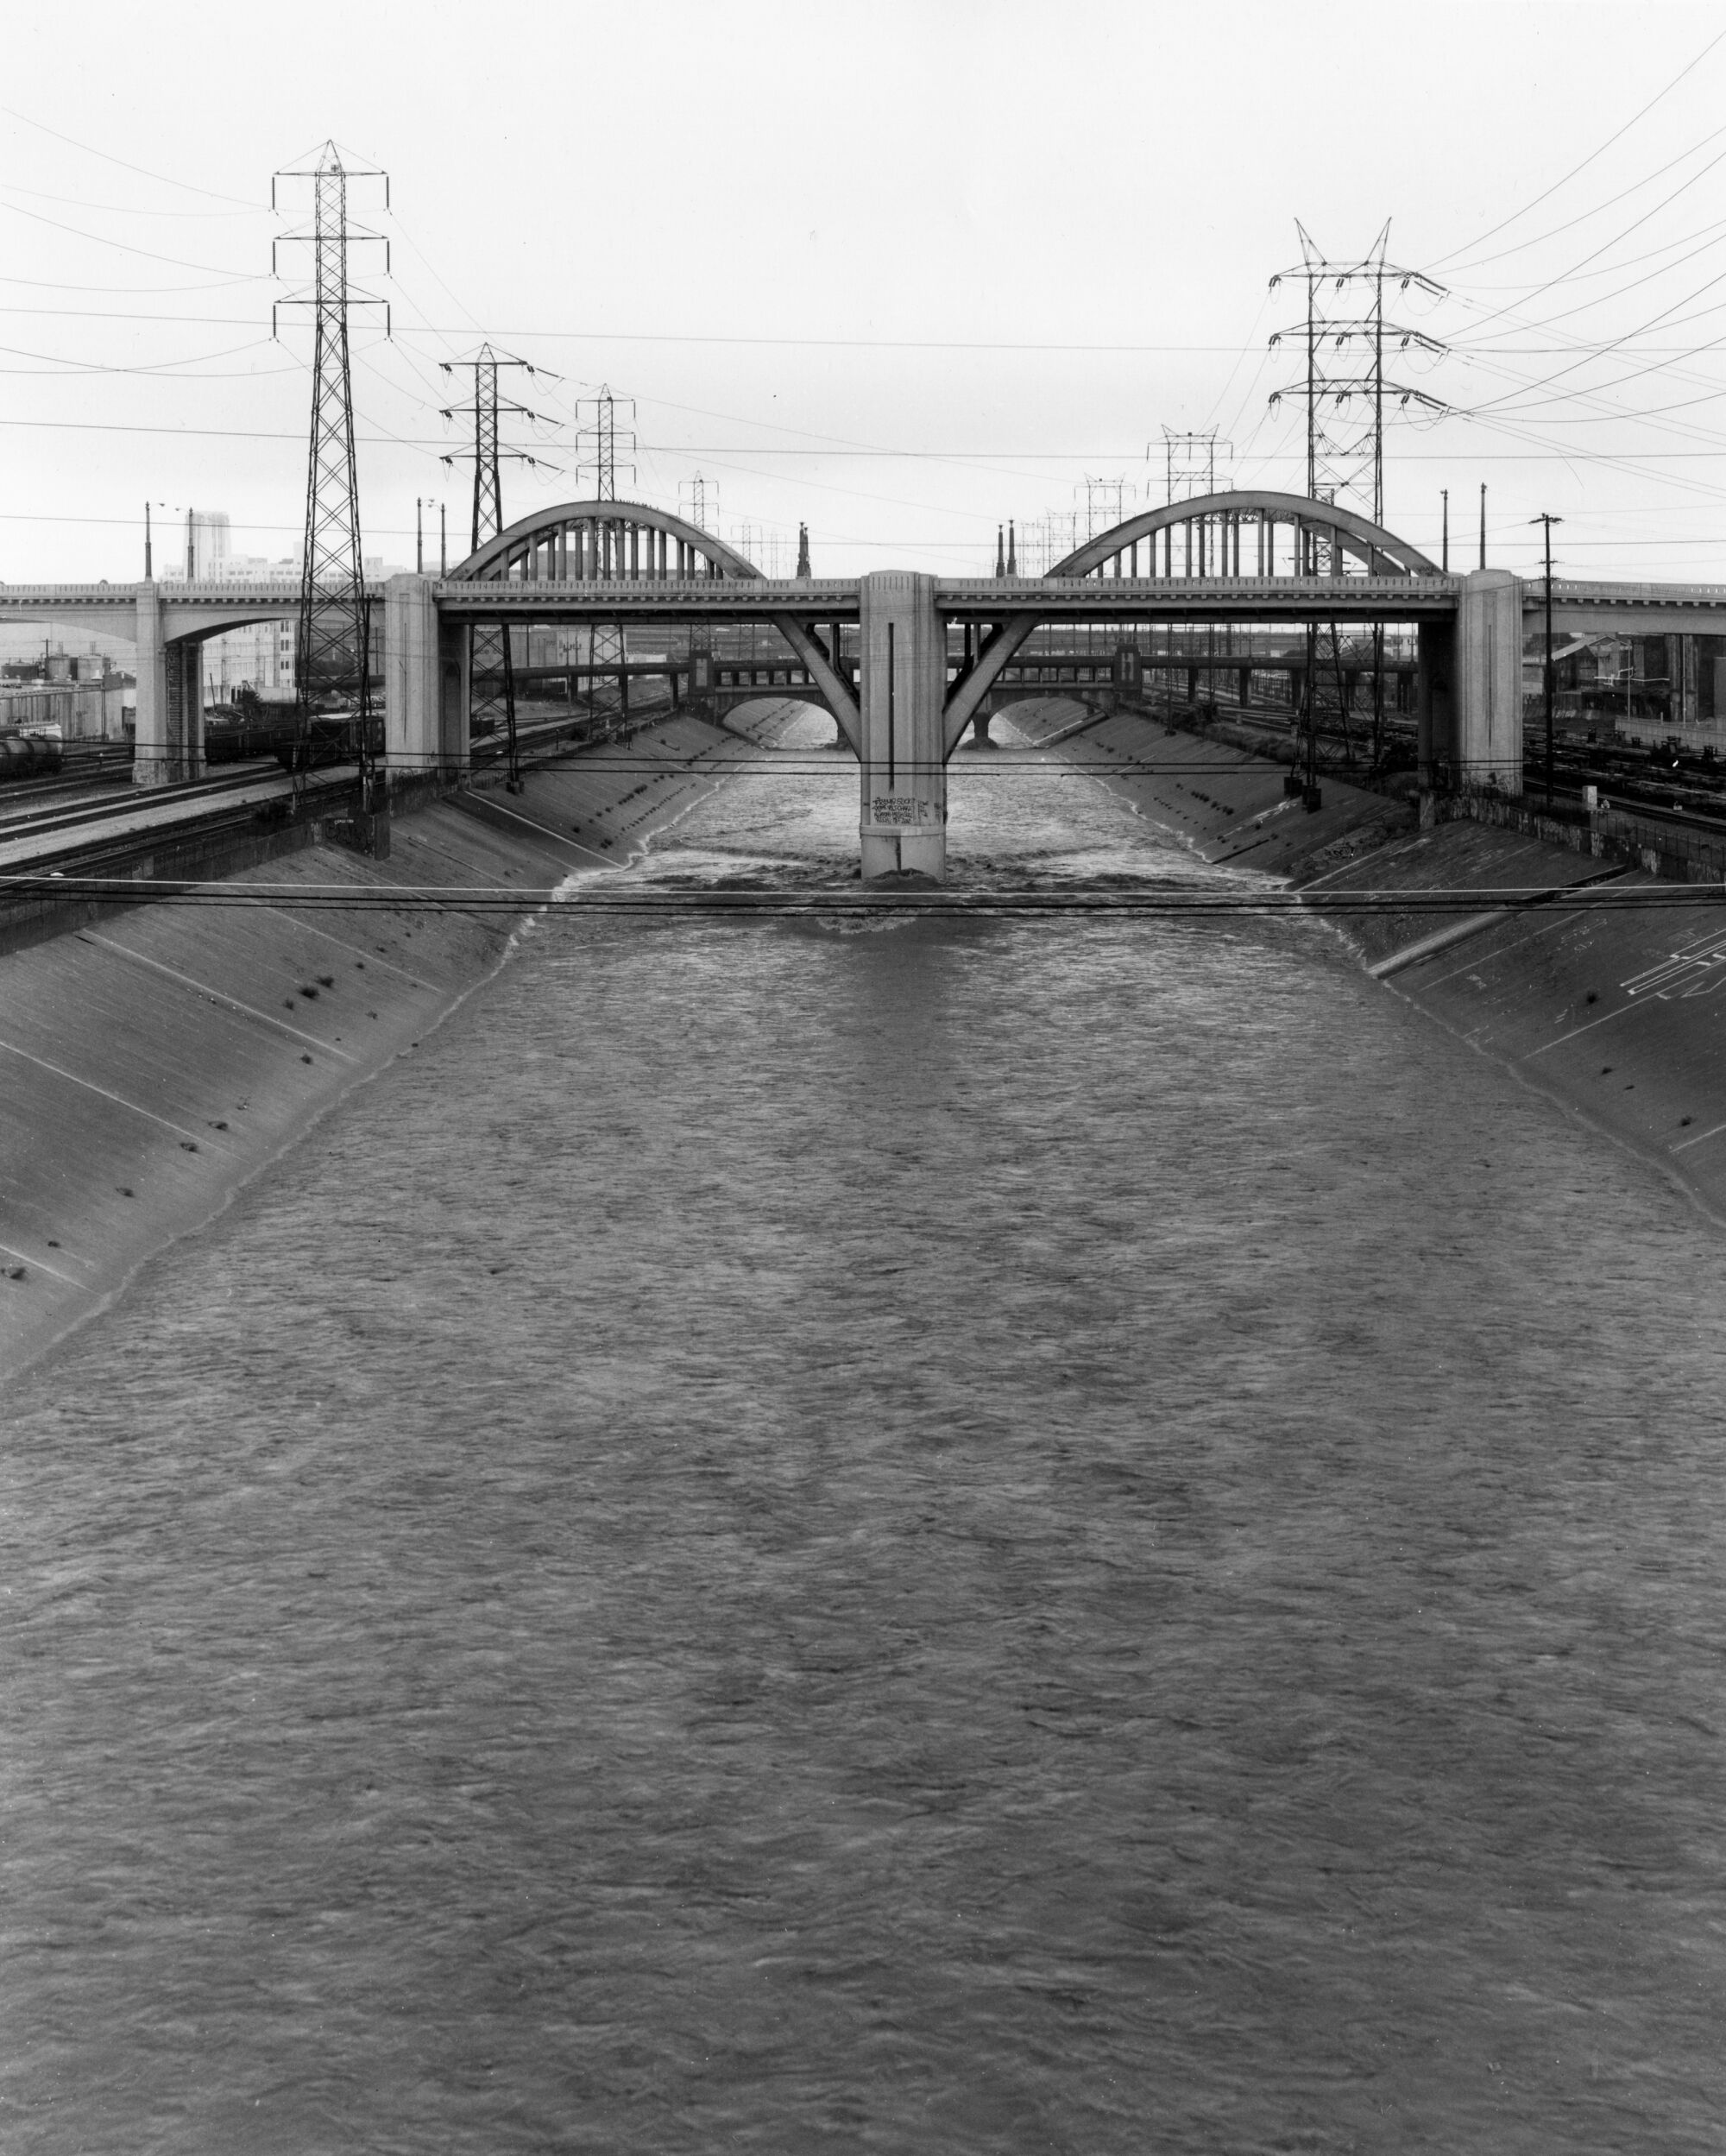 A black and white images shows the portion of the old 6th Street Viaduct running over the channelized L.A. River